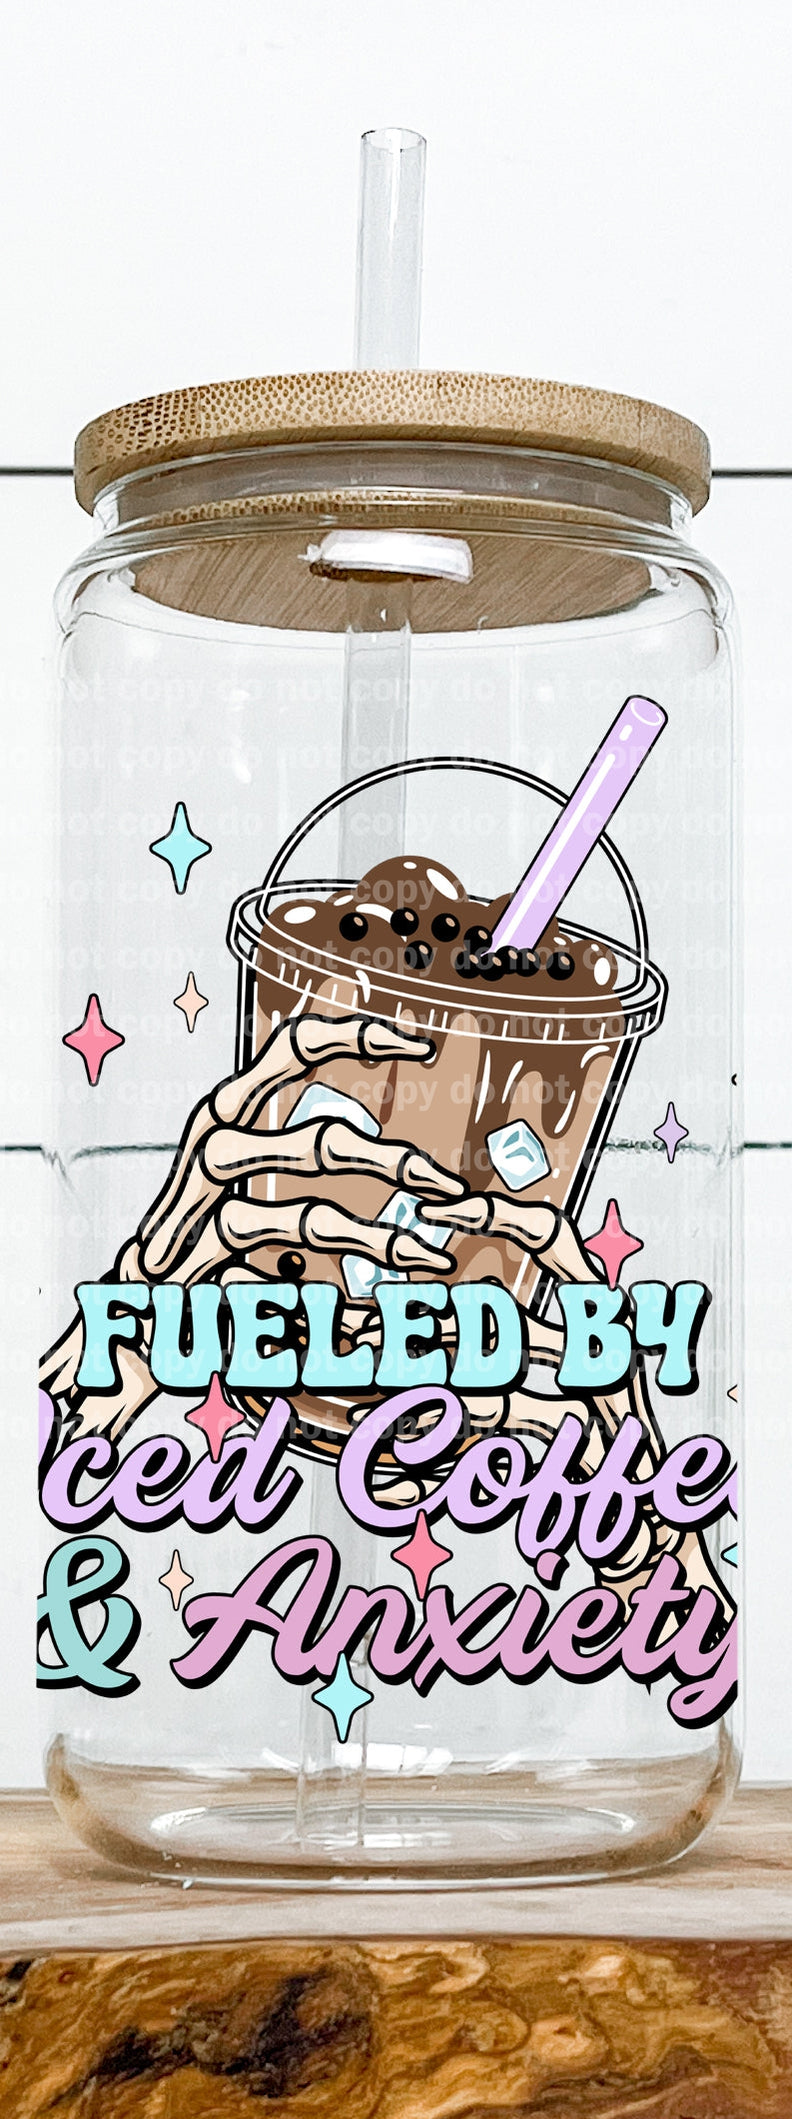 Fueled By Iced Coffee And Anxiety Decal 2.9 x 3.5